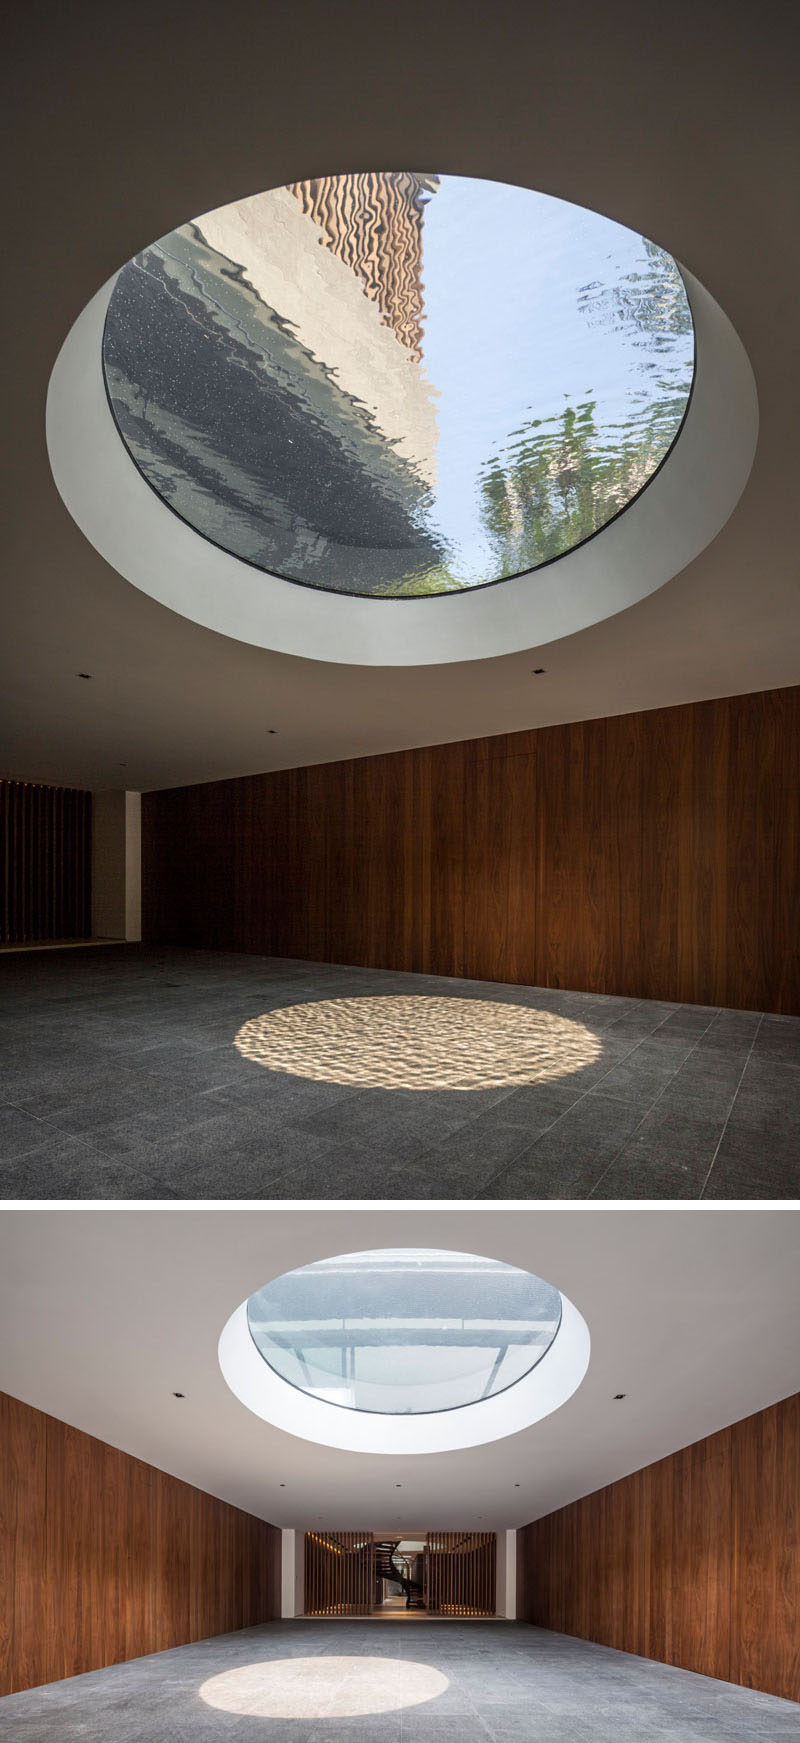 In the entrance to this home, there's a large skylight, that shows water from the water feature positioned directly above.